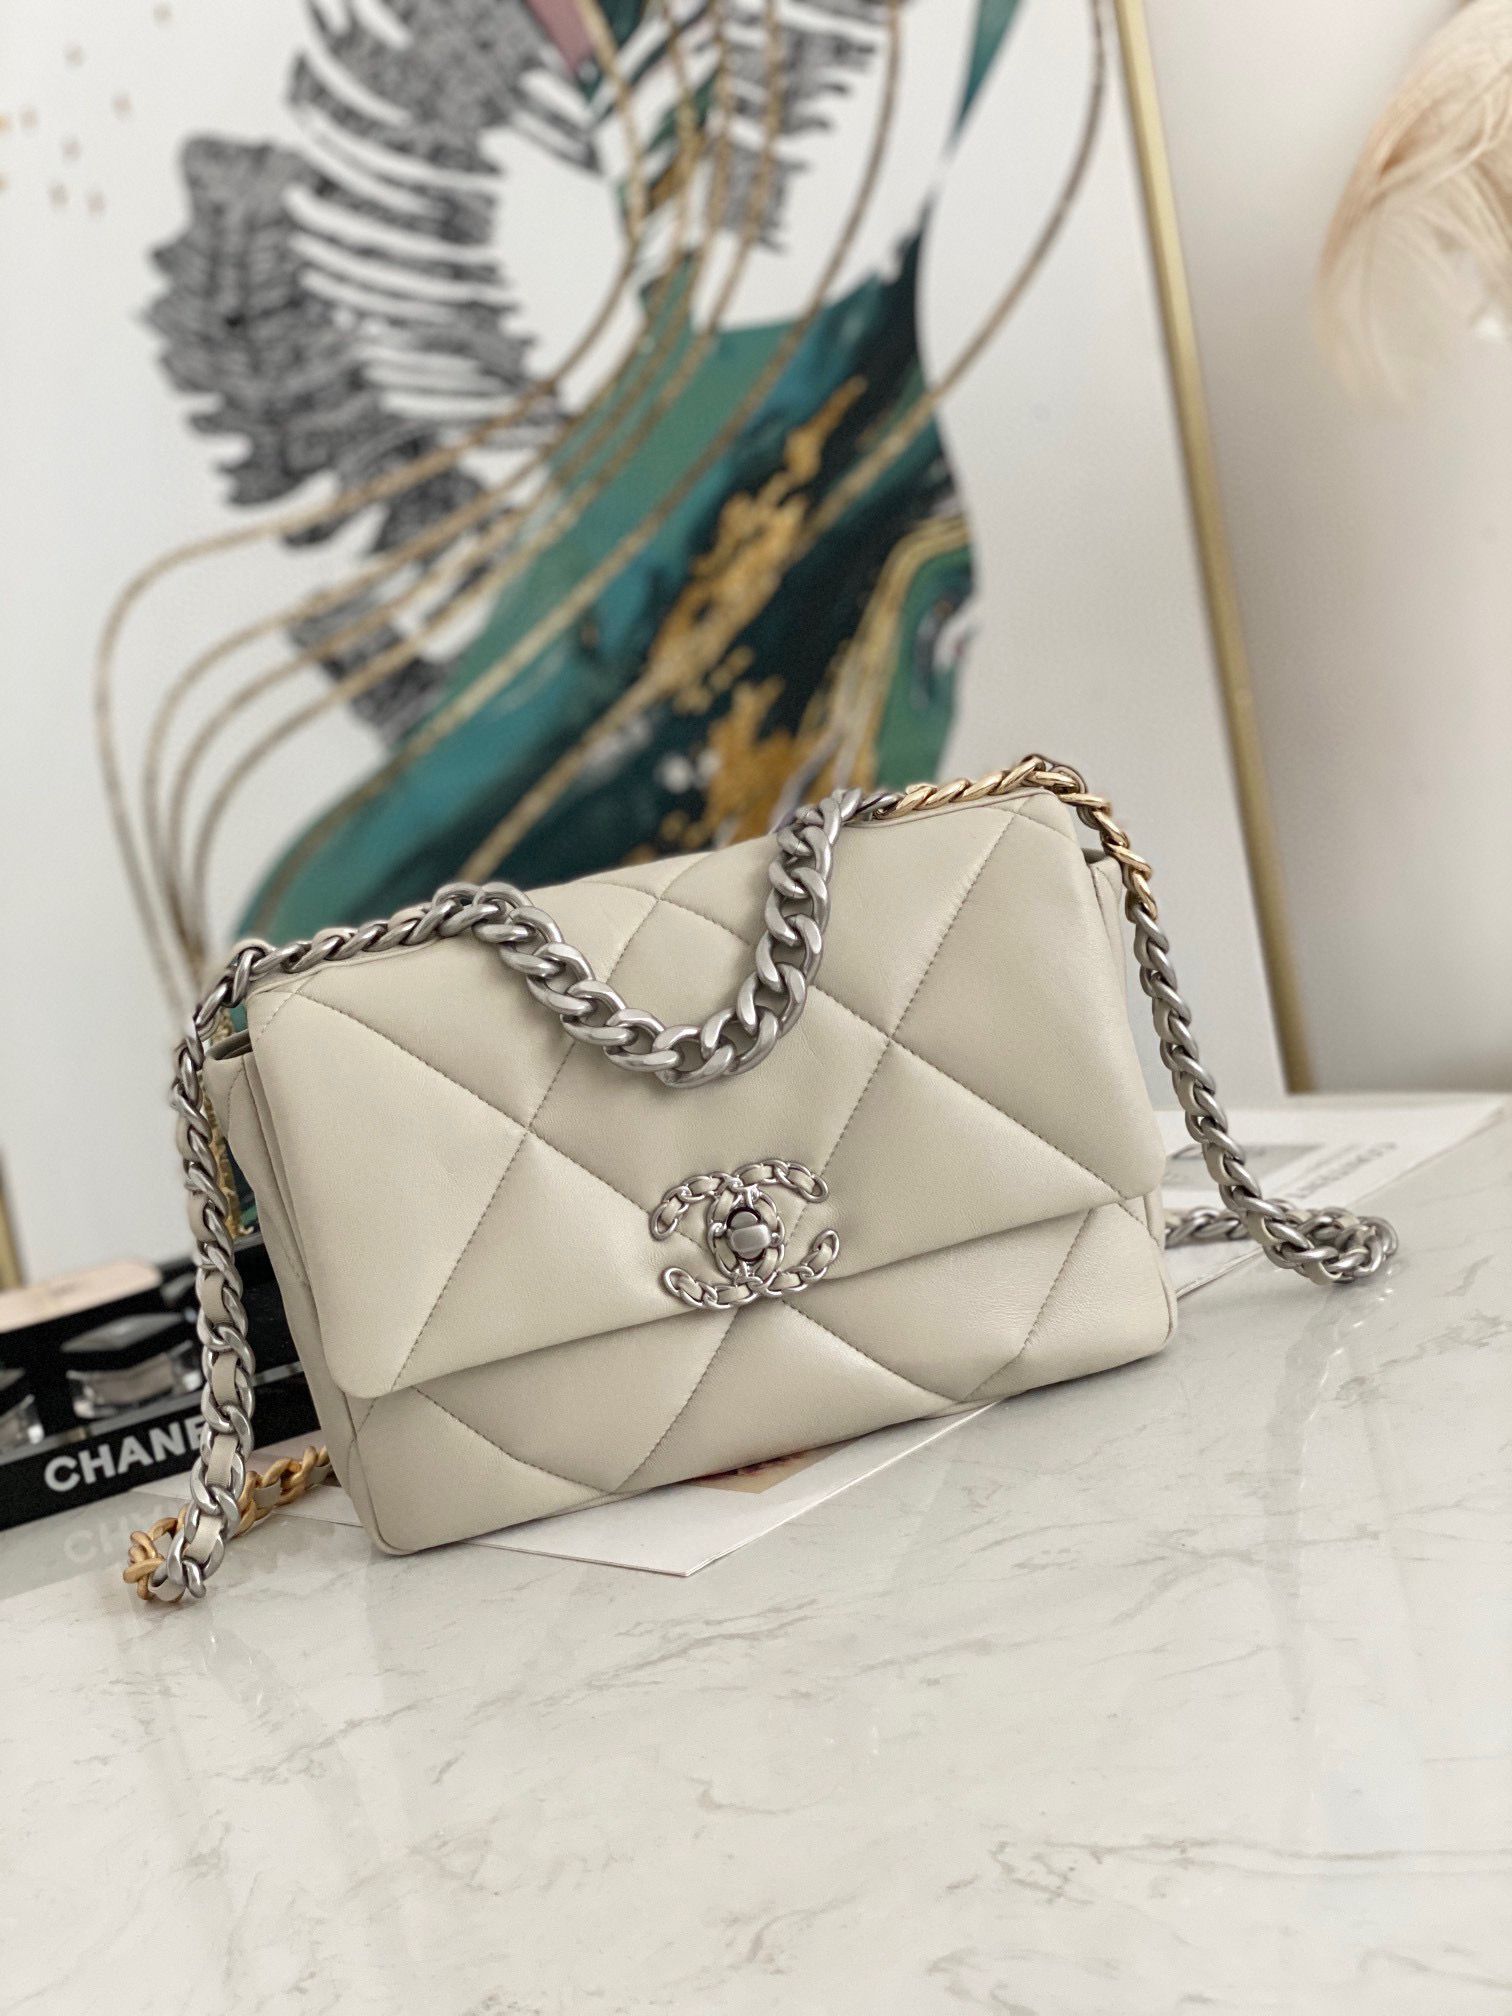 Chanel 19 flap bag AS1160 AS1161 AS1162 Off White Silver Hardware